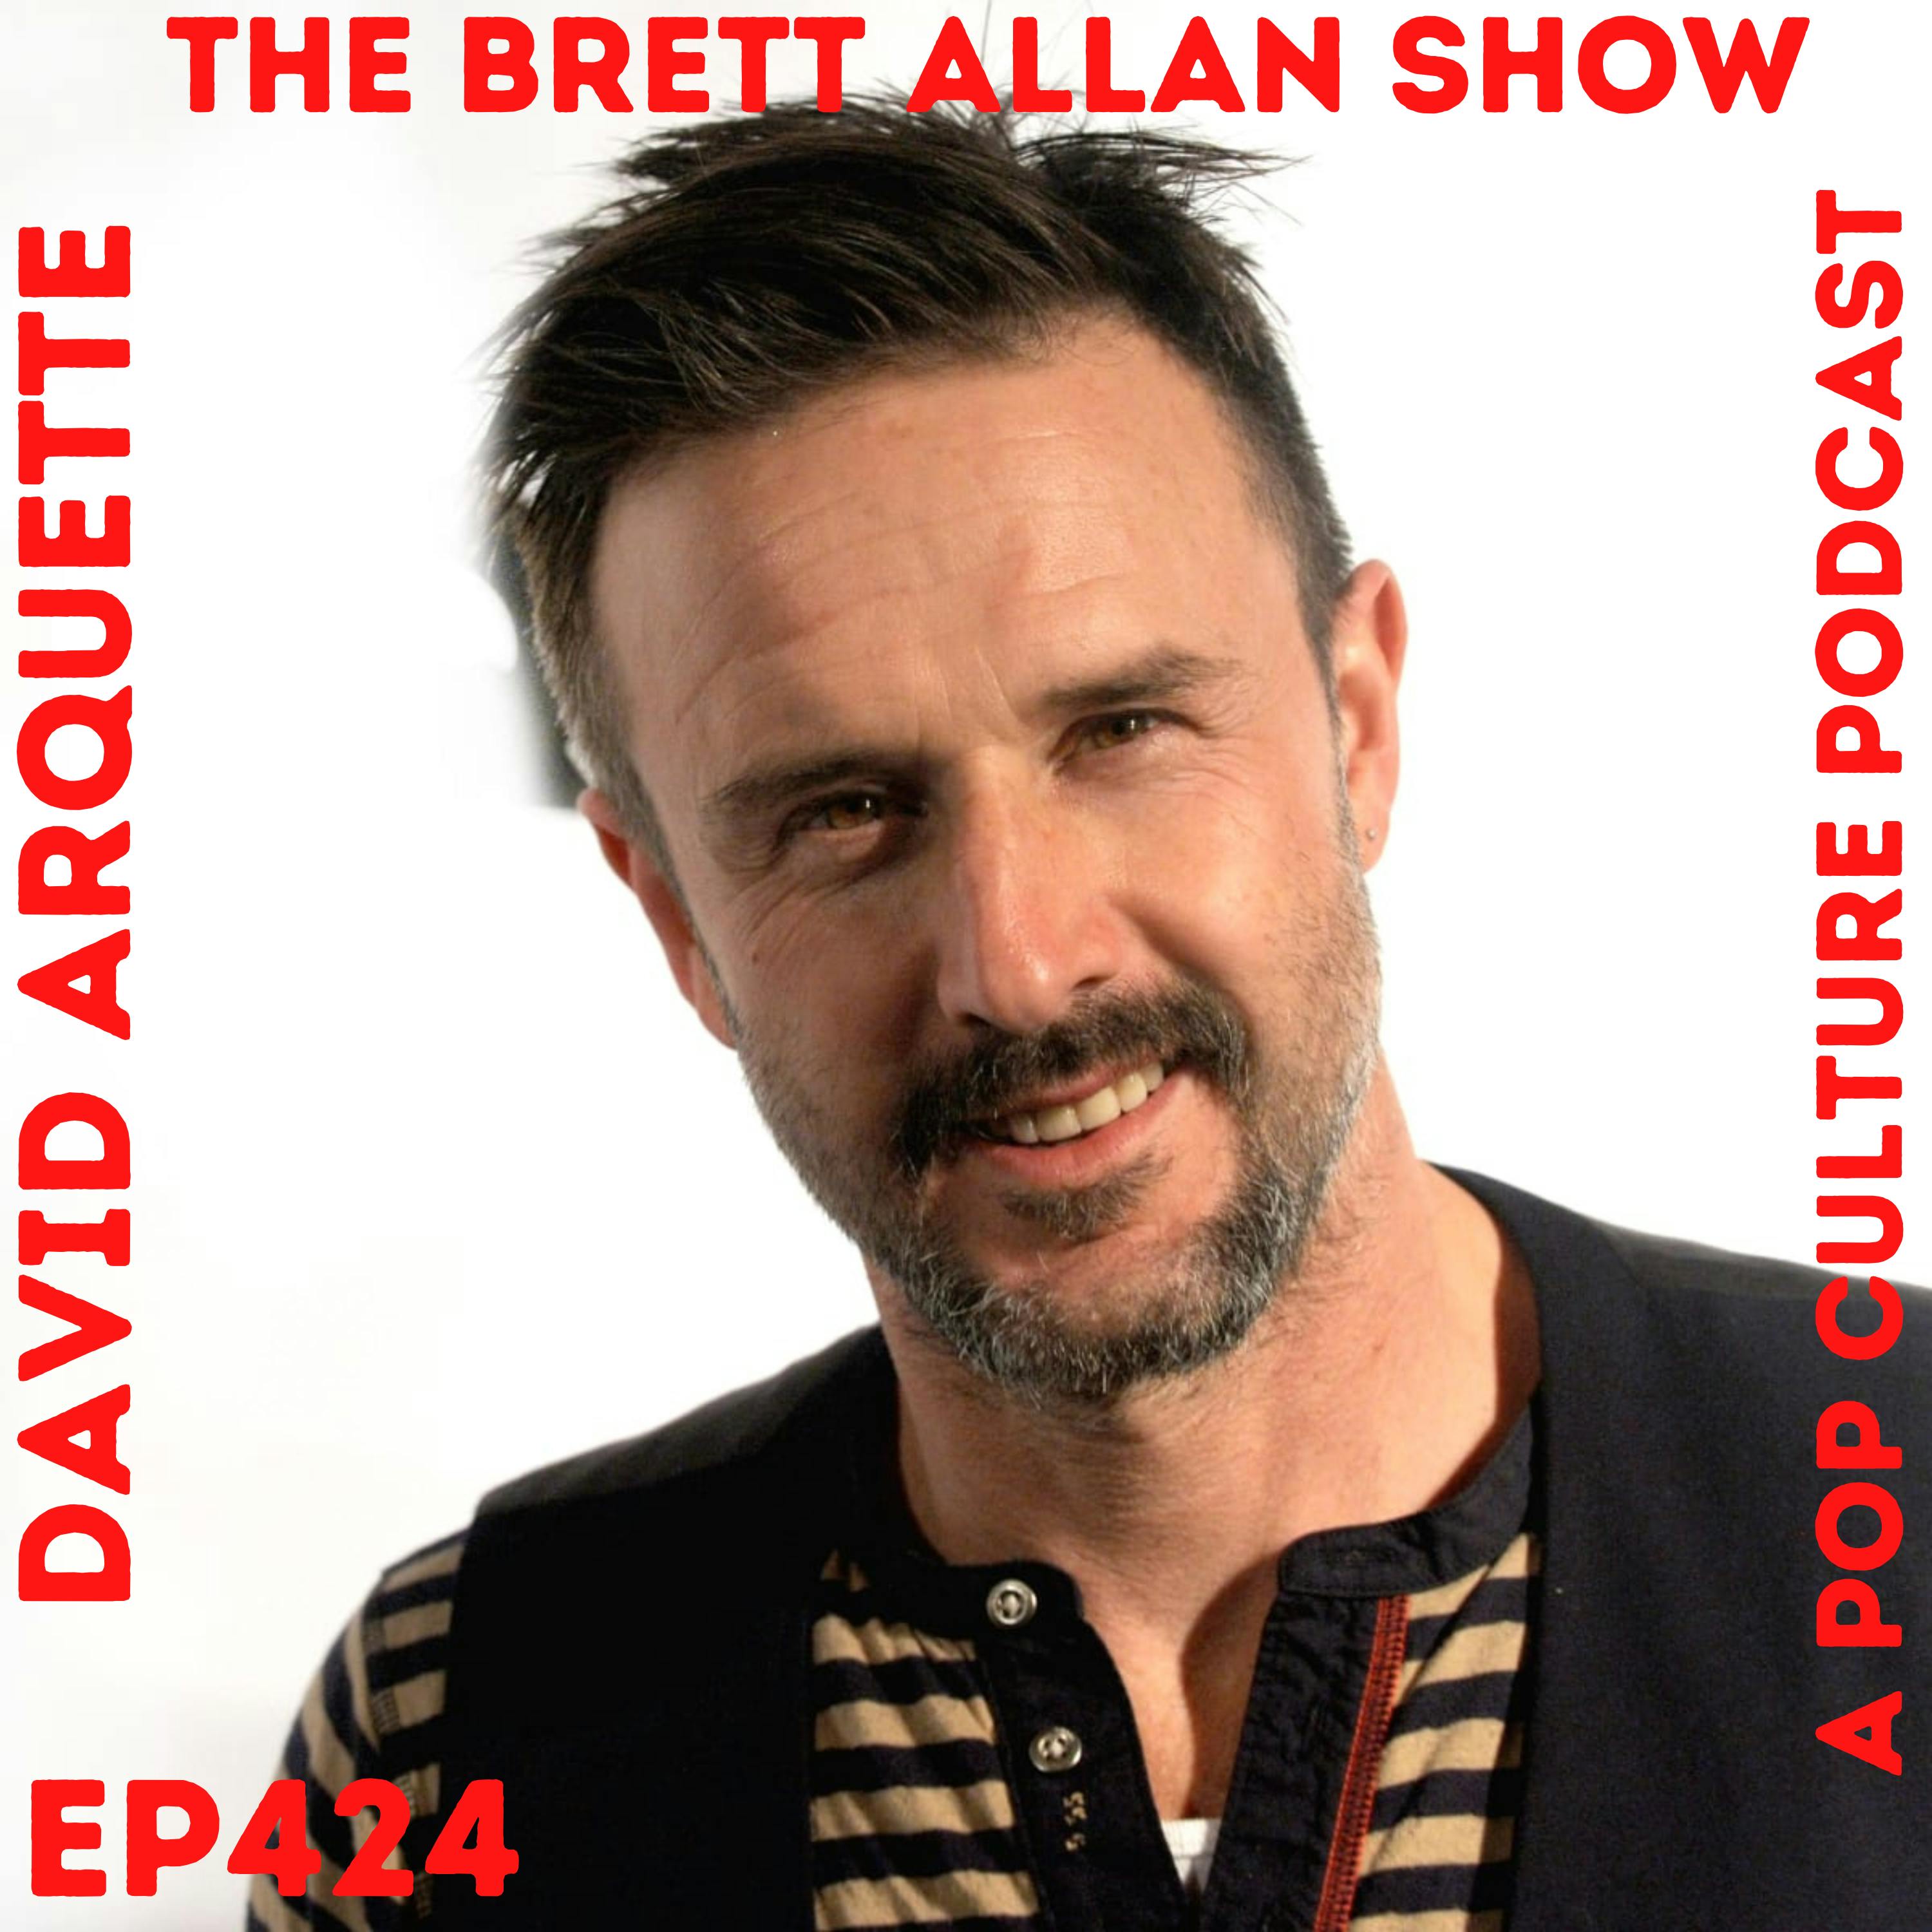 David Arquette Discusses His Latest Film The Storied Life of A.J. Fikry and Much More! Image